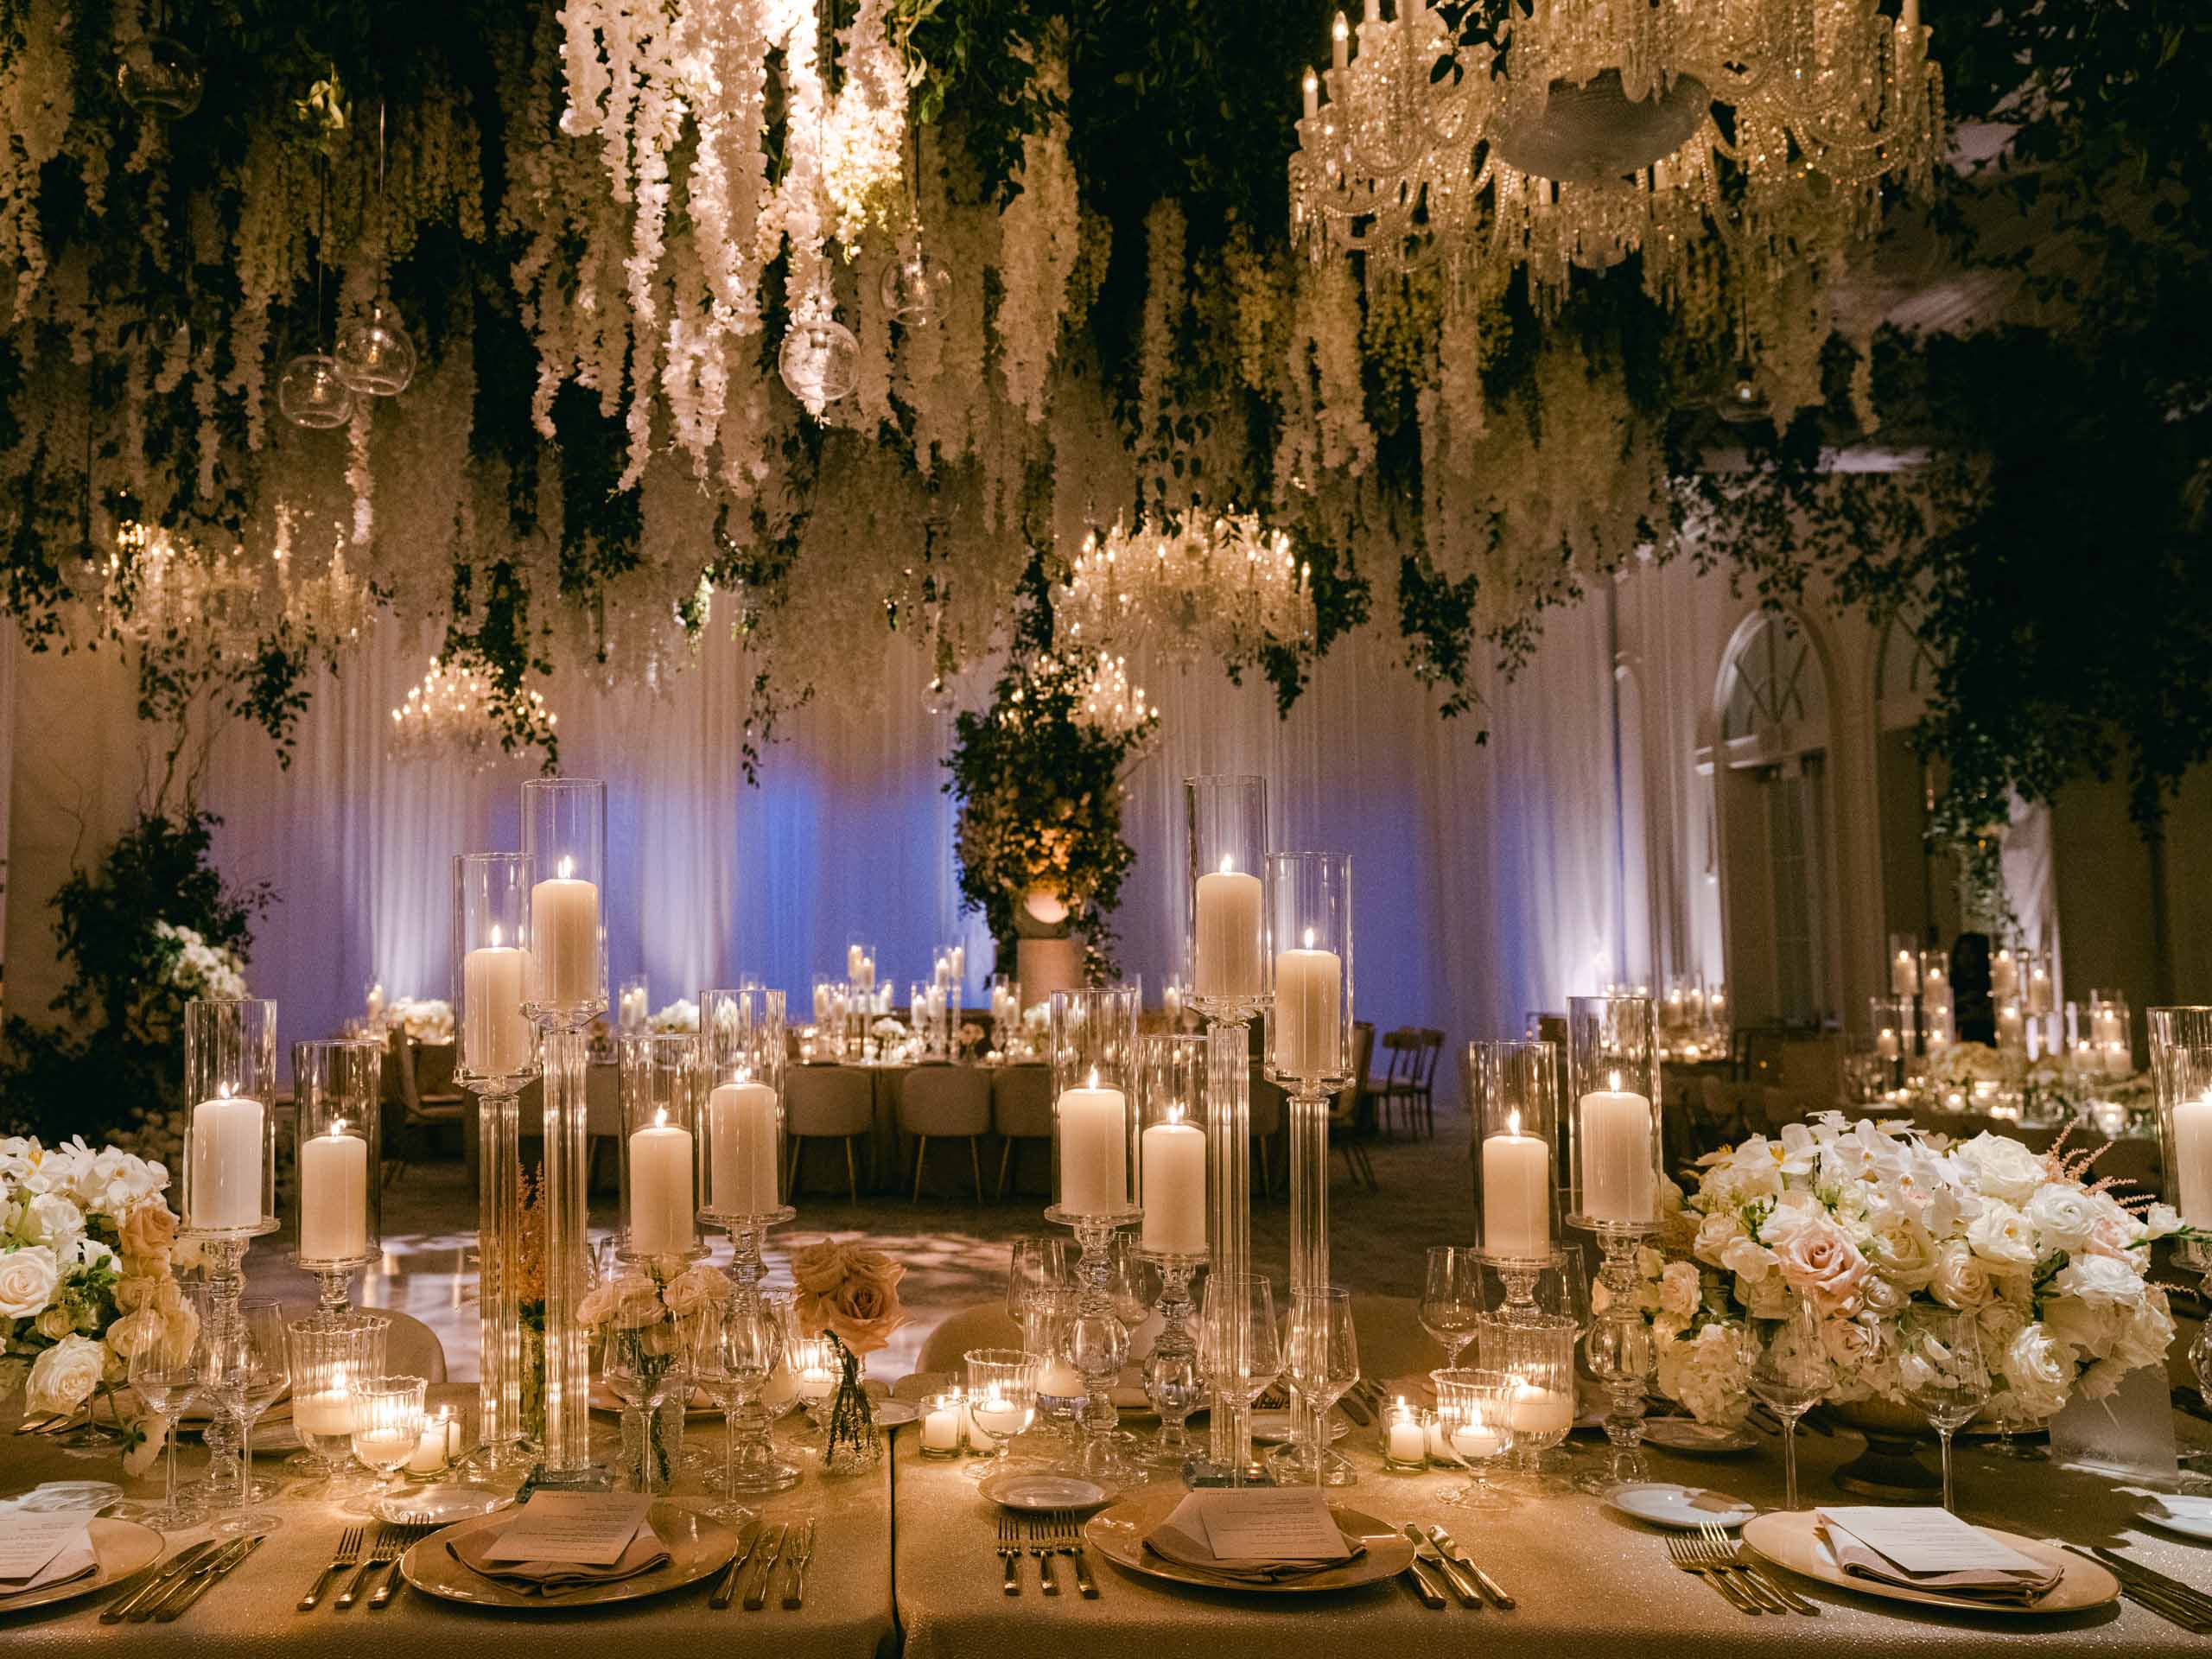 hall decorated for a wedding dinner with white floral arrangements.